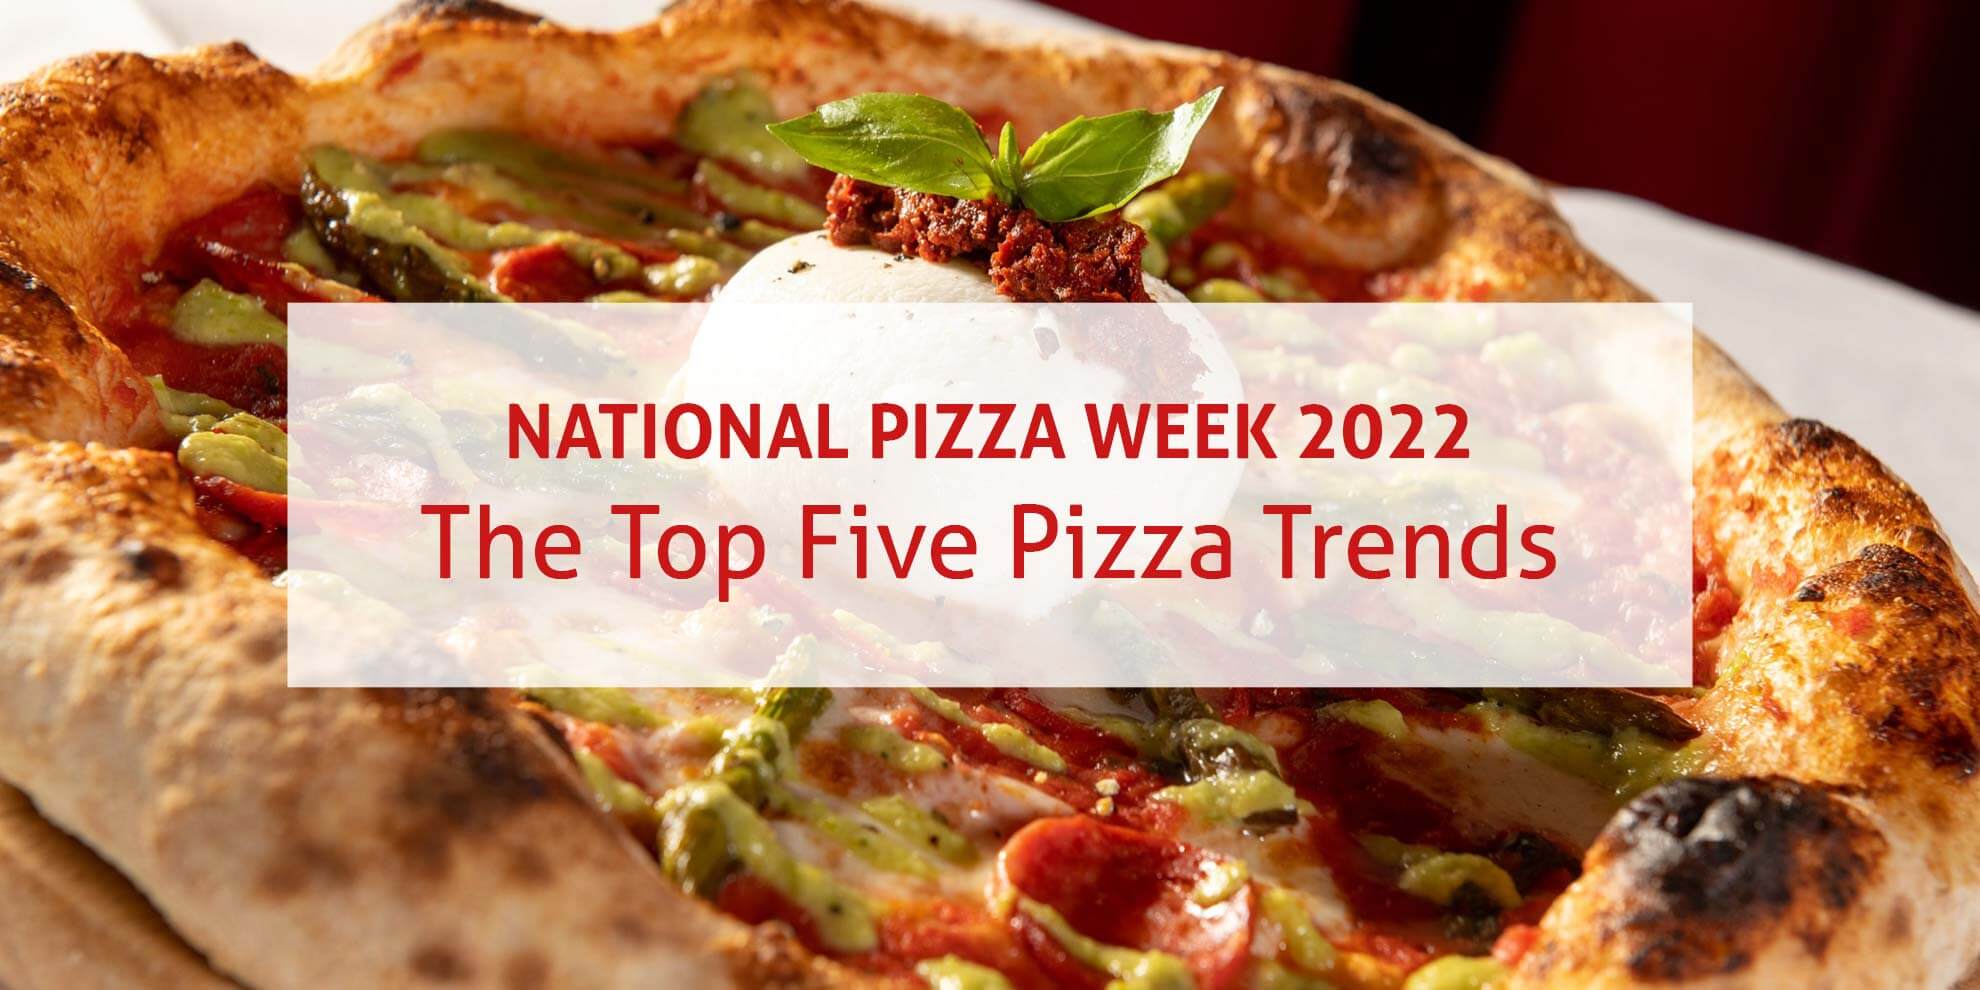 Top 5 pizza trends for National Pizza Week 2022